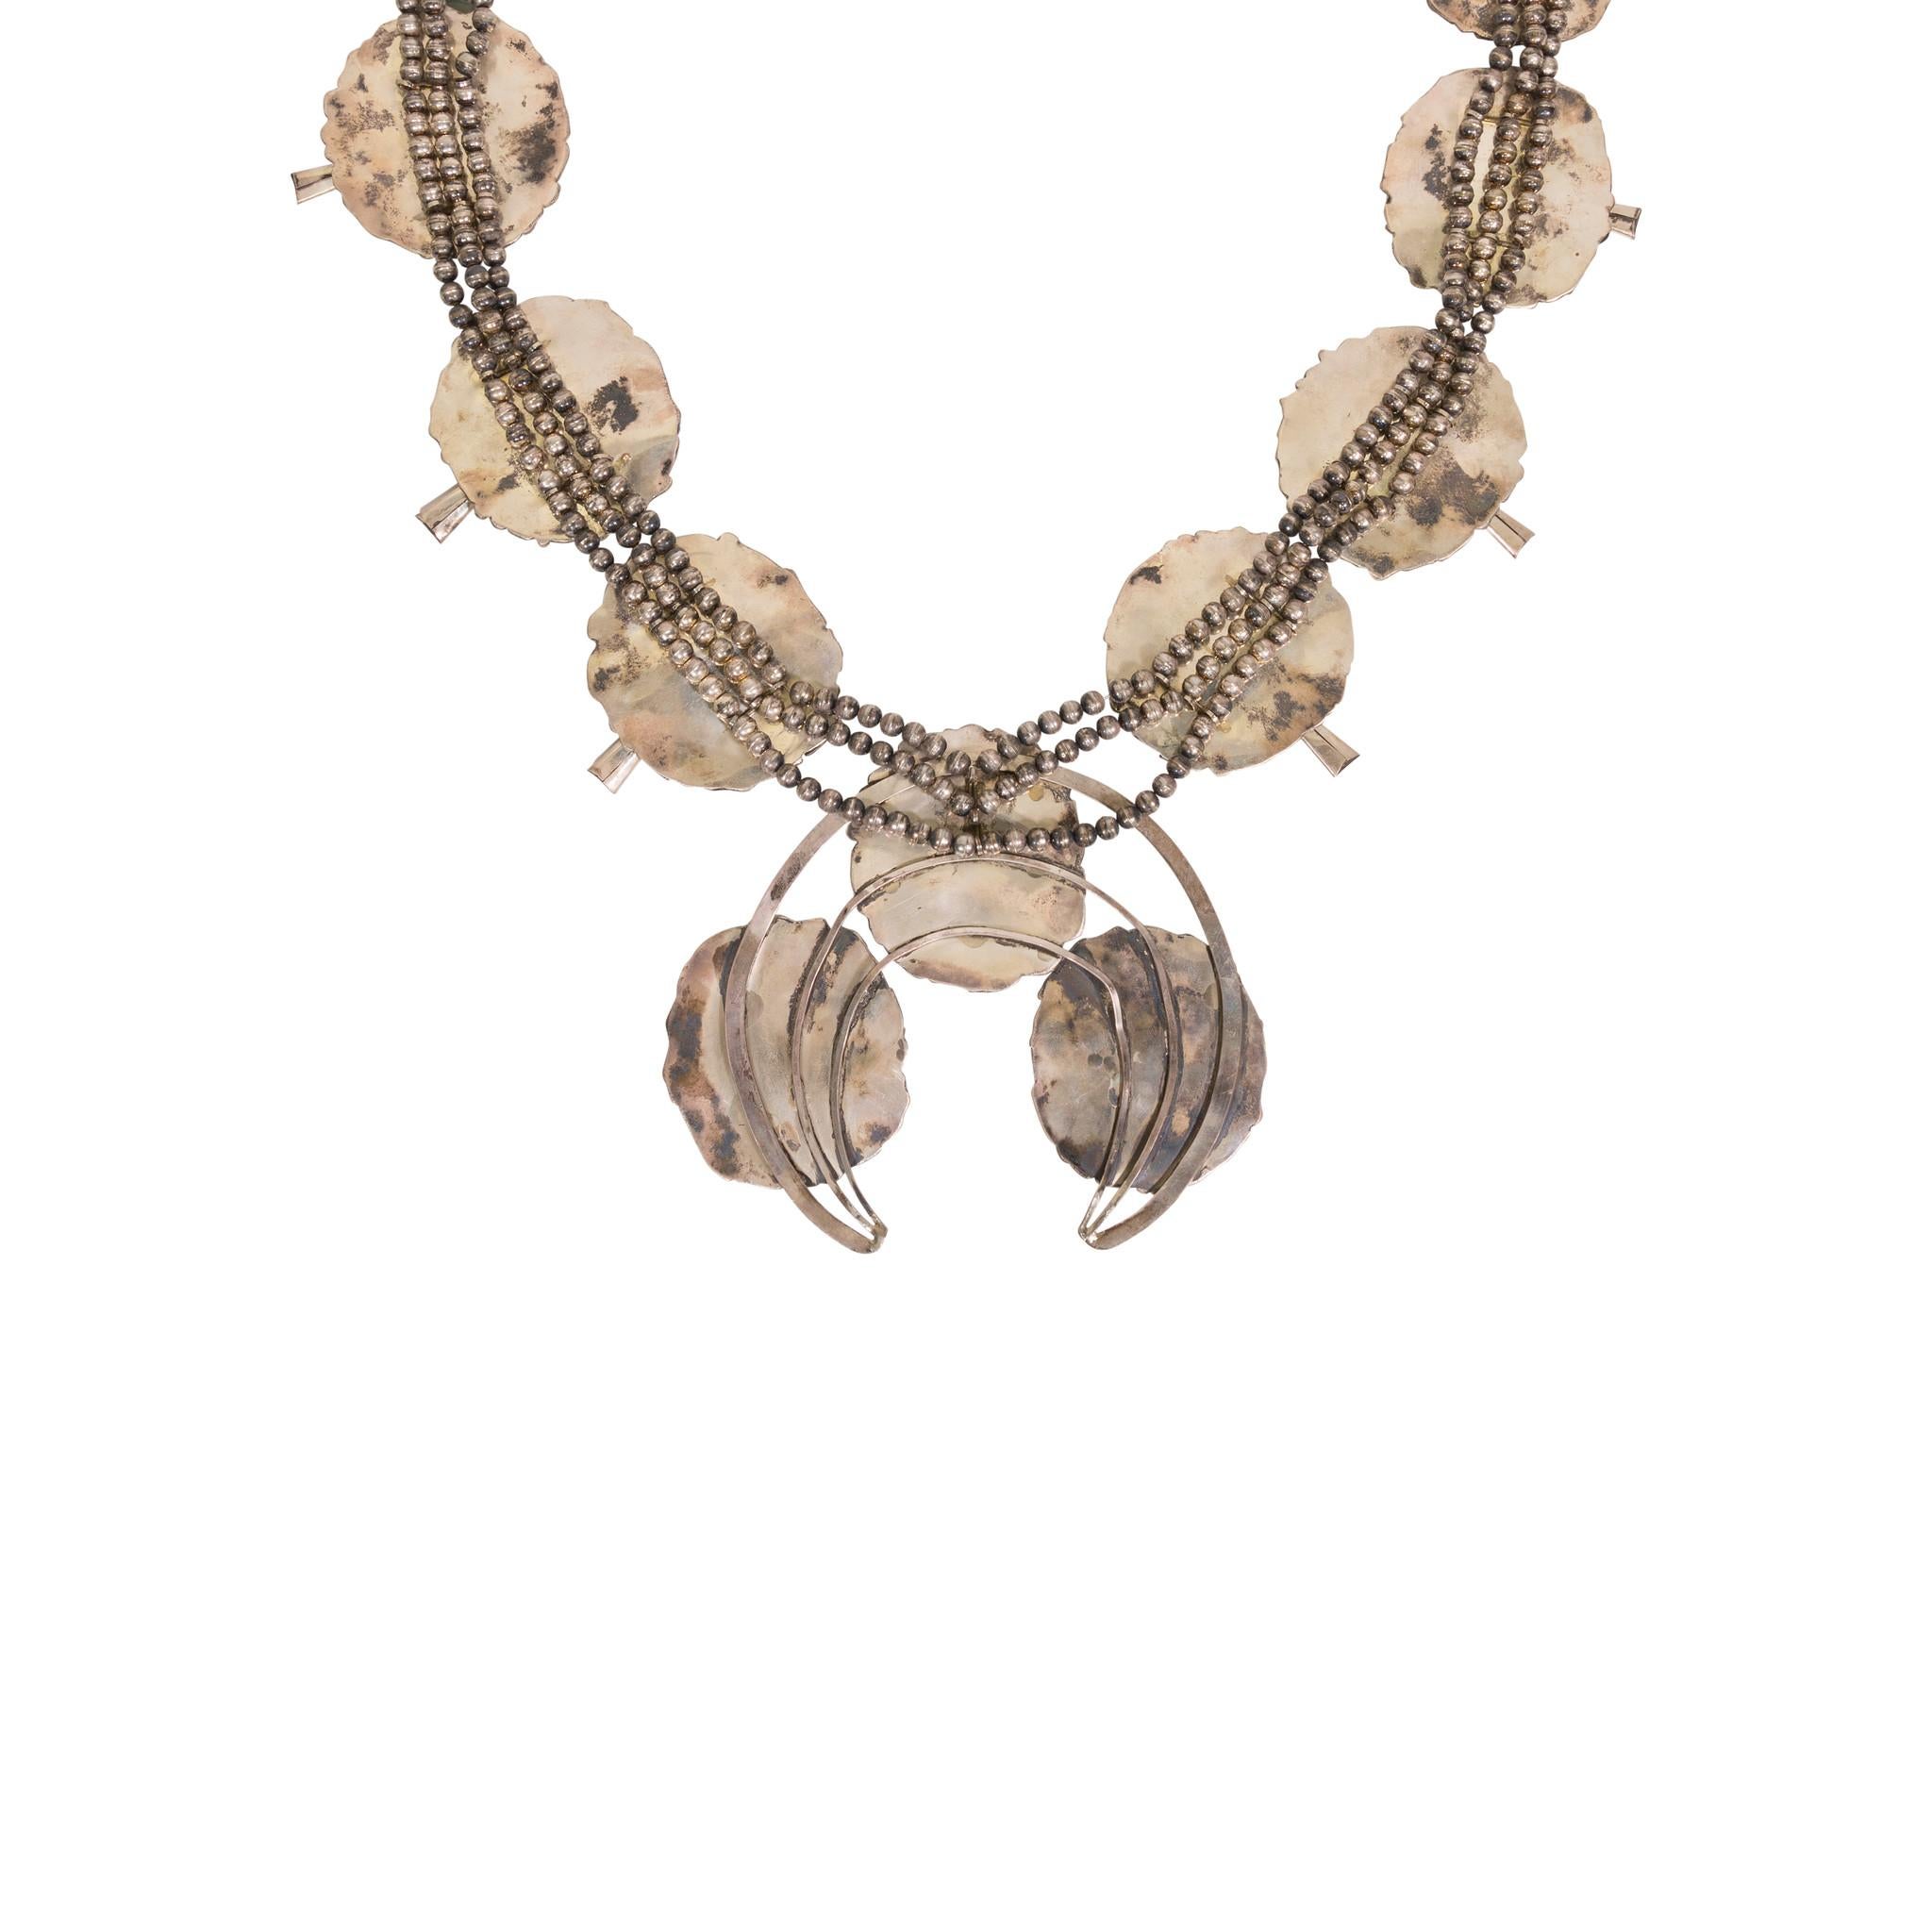 Exceptional Navajo silver dollar squash blossom necklace. Crafted in 1925 for a special occasion/pow wow. Eleven 3